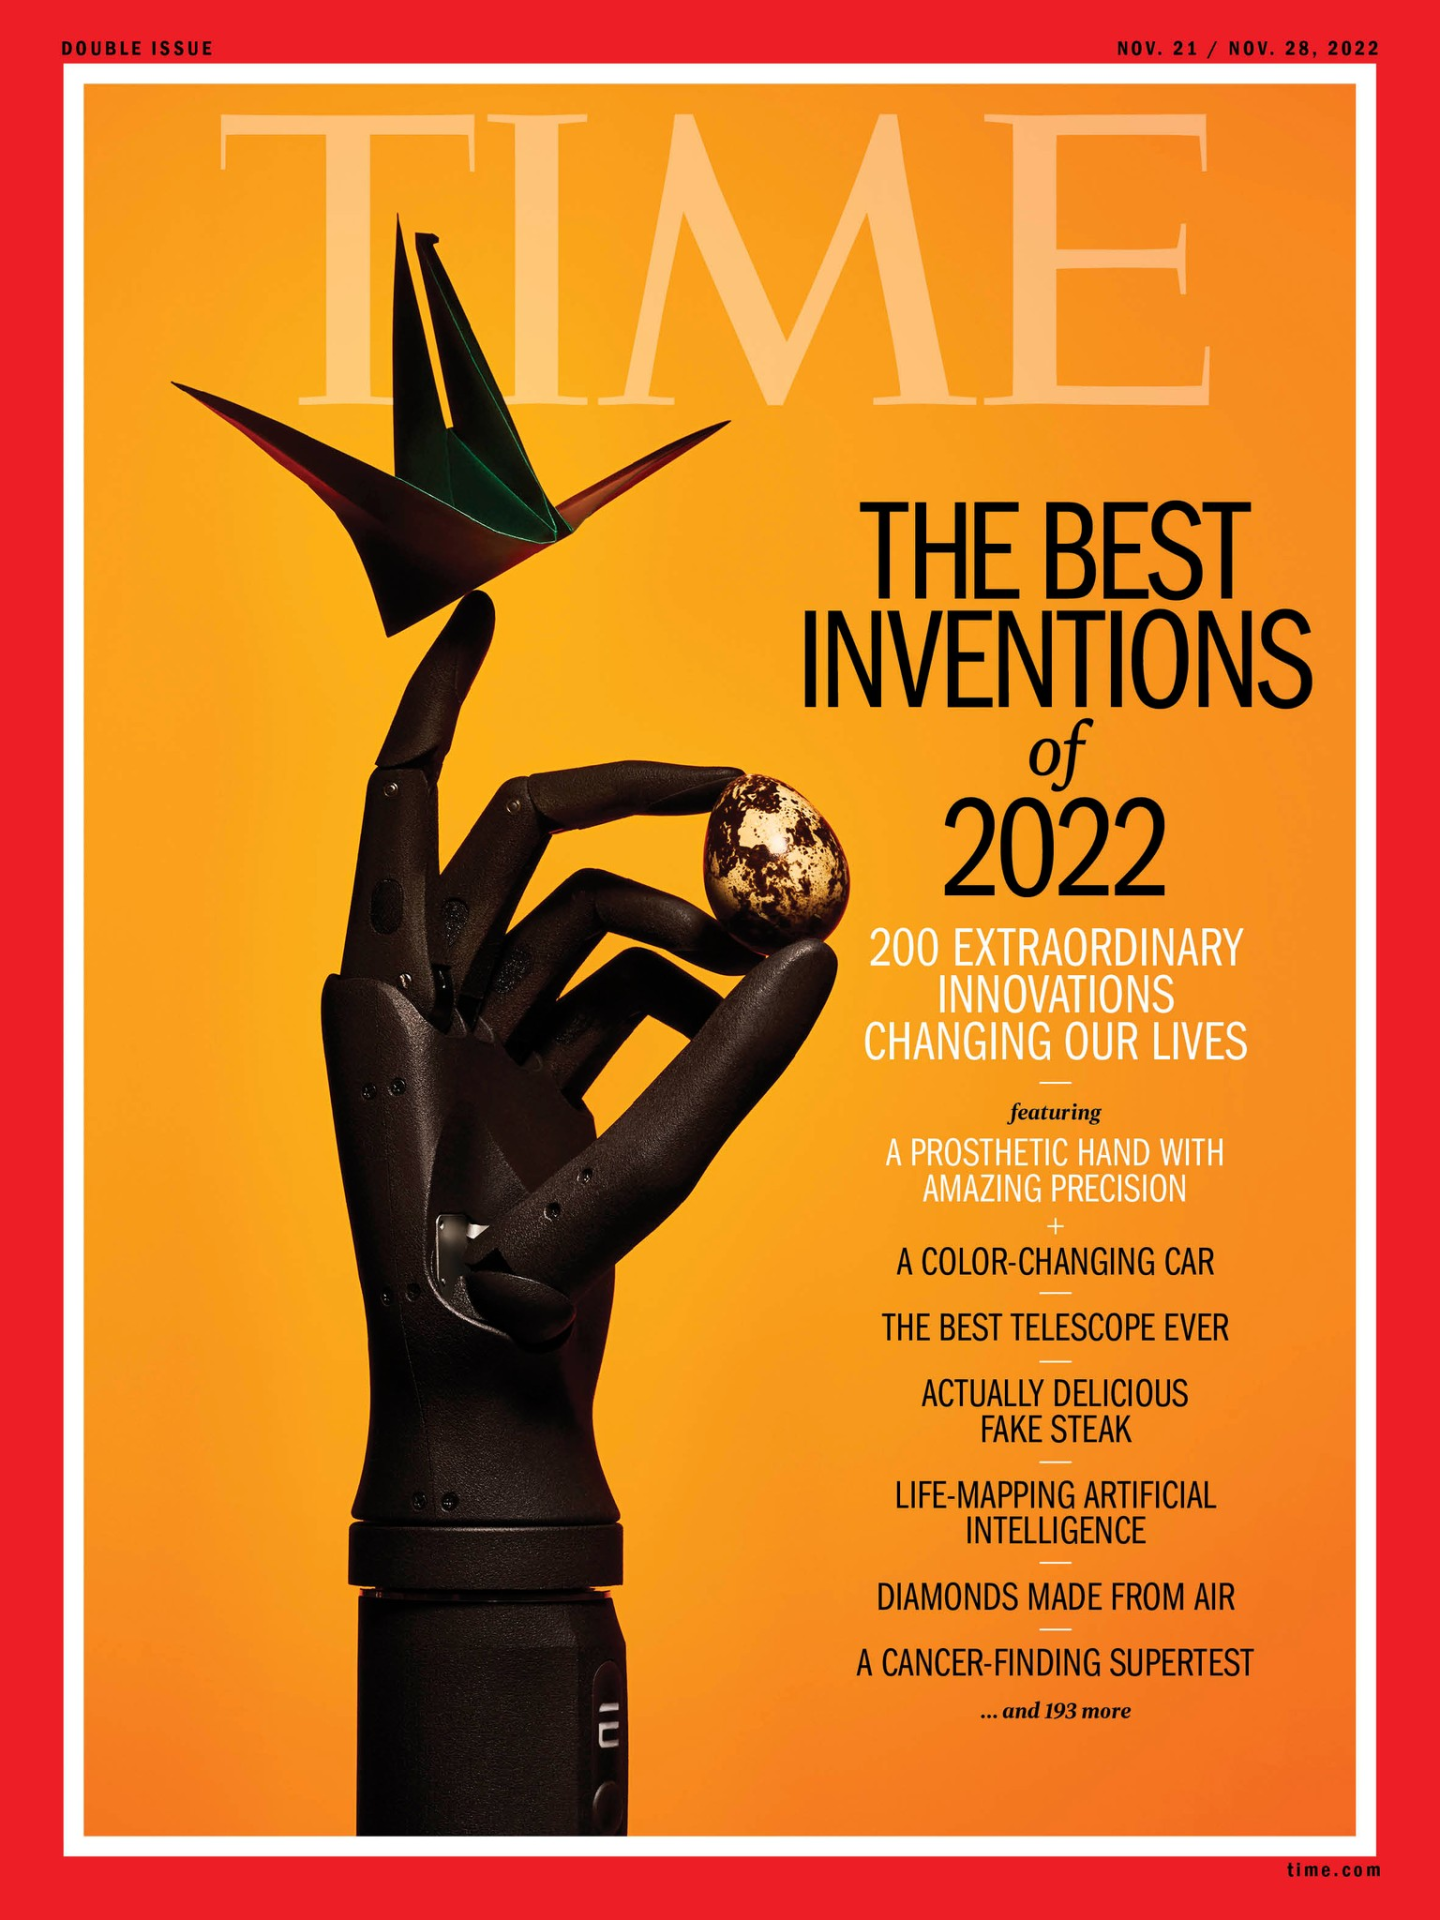 Quantum Computer Makes Time’S Best Invention Of 2022.